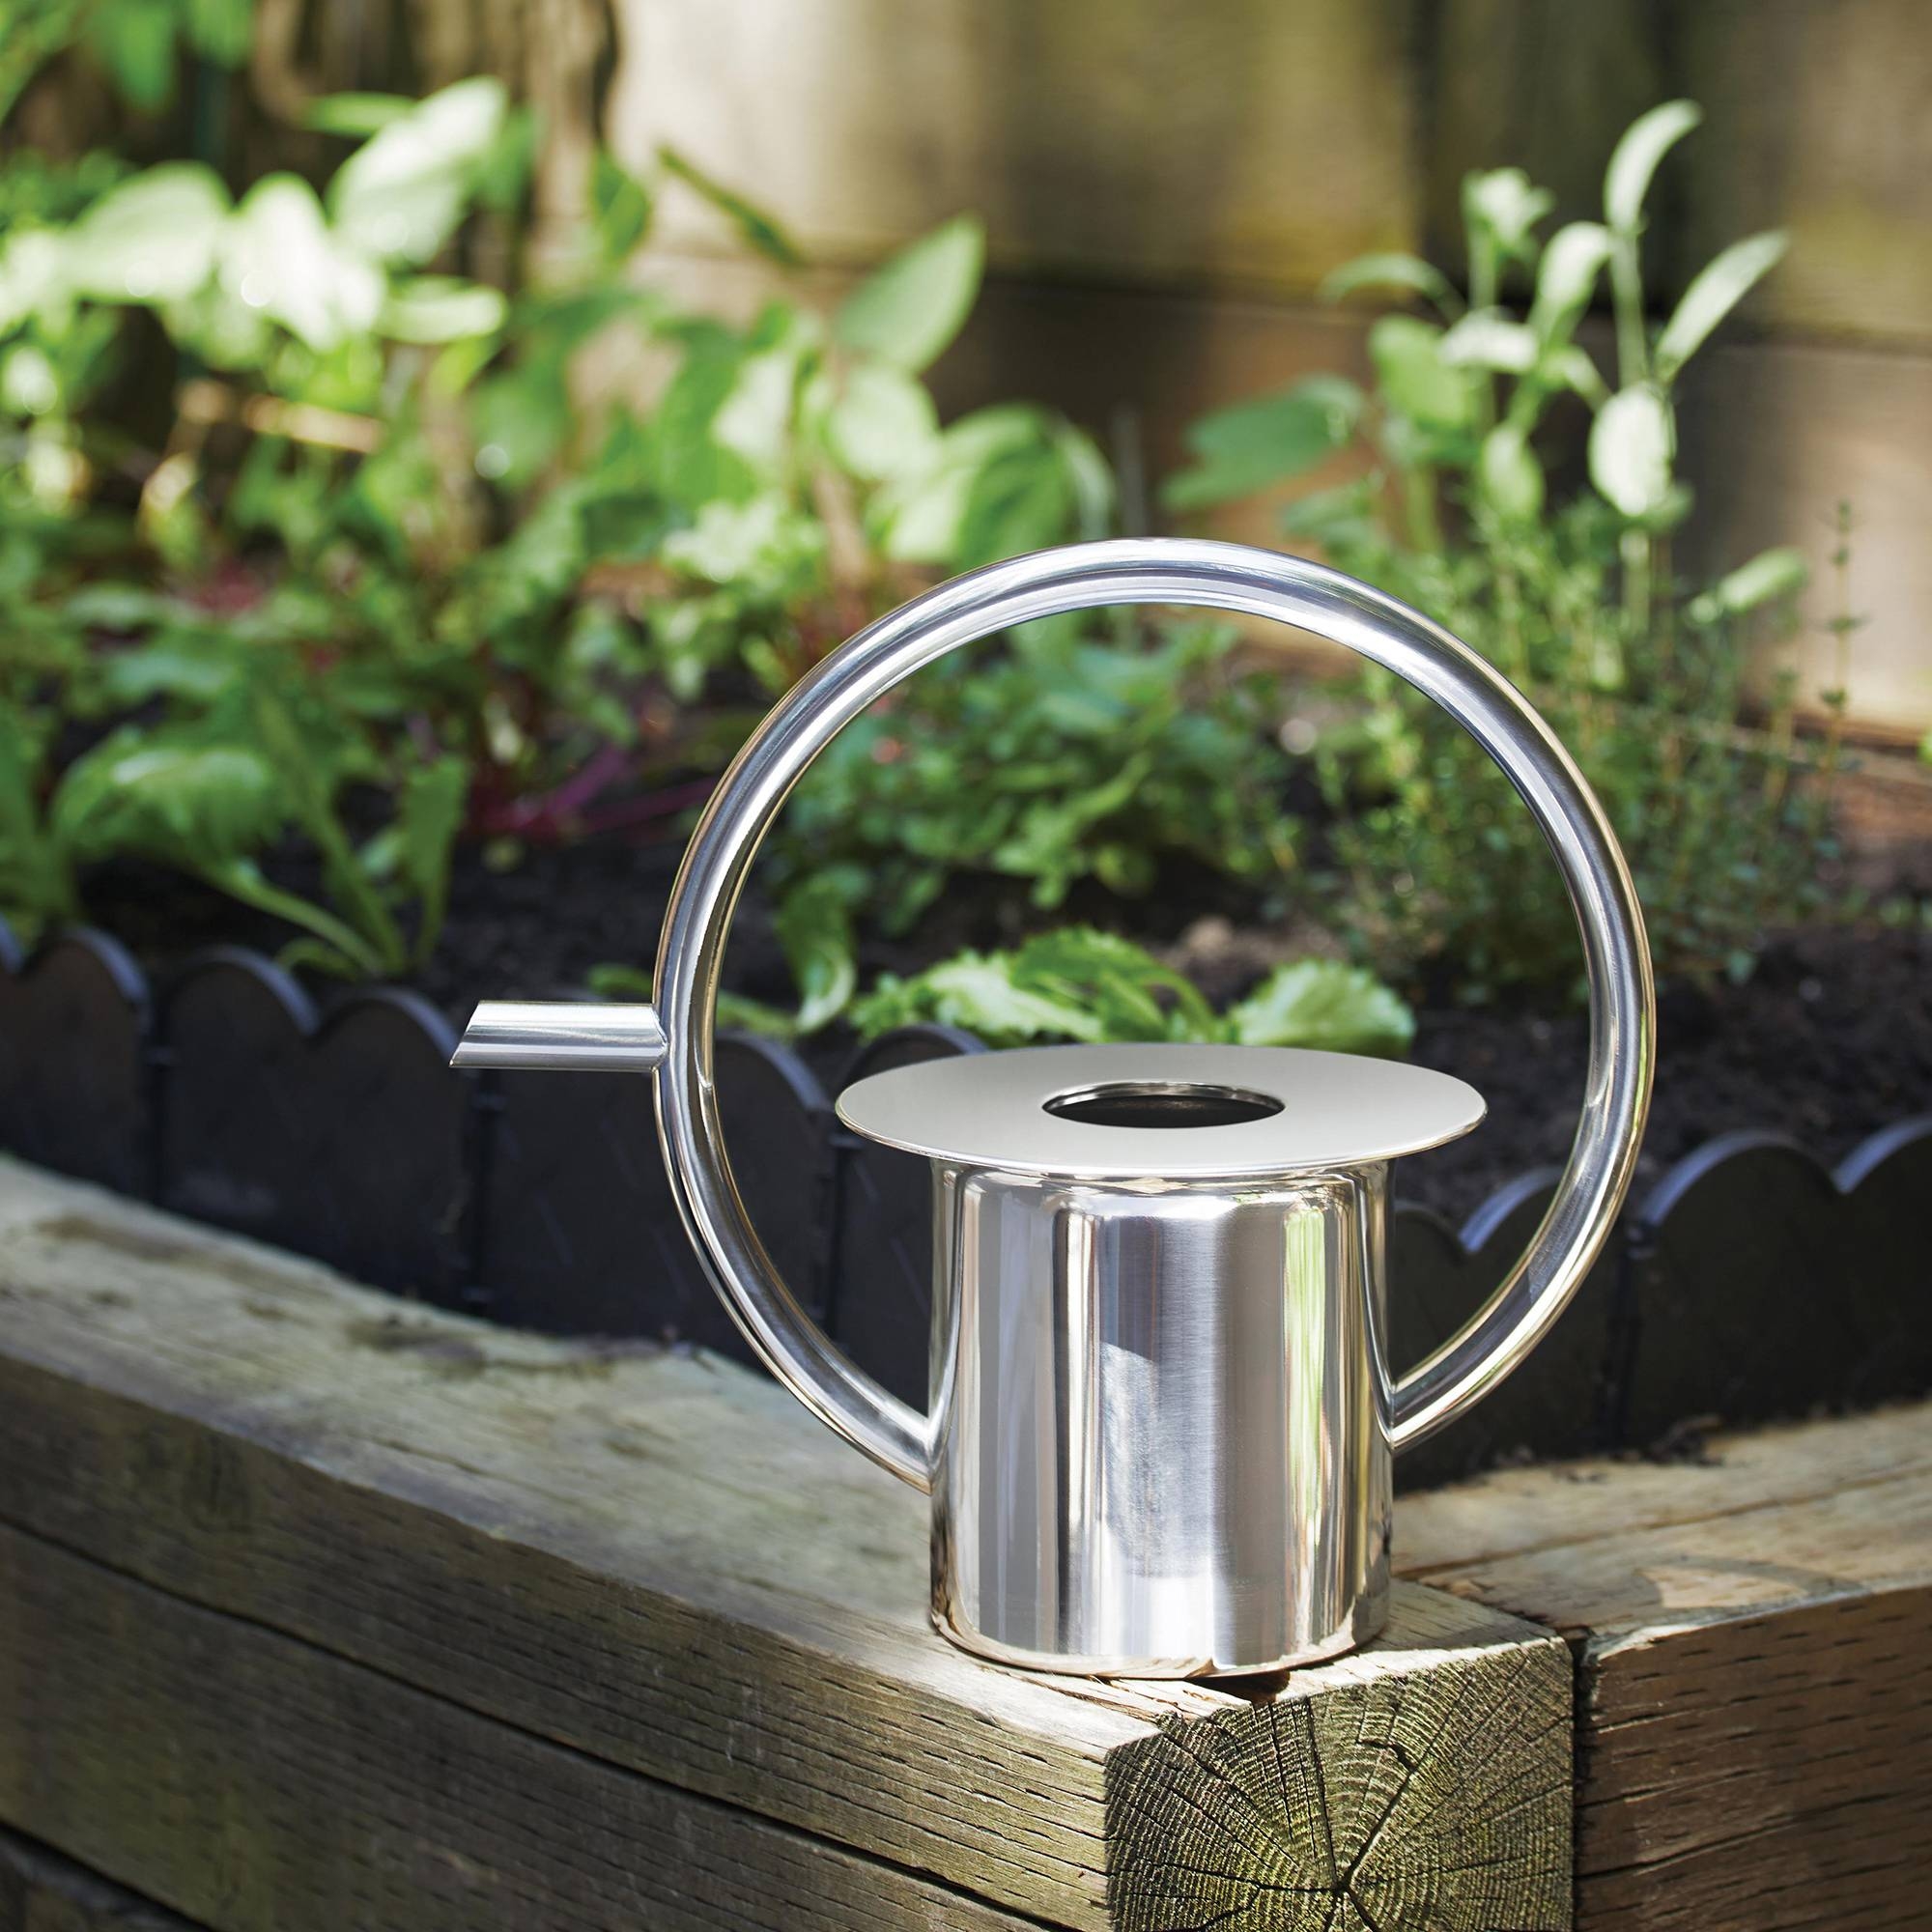 Umbra Quench Stainless Steel Watering Can 1L Image 2